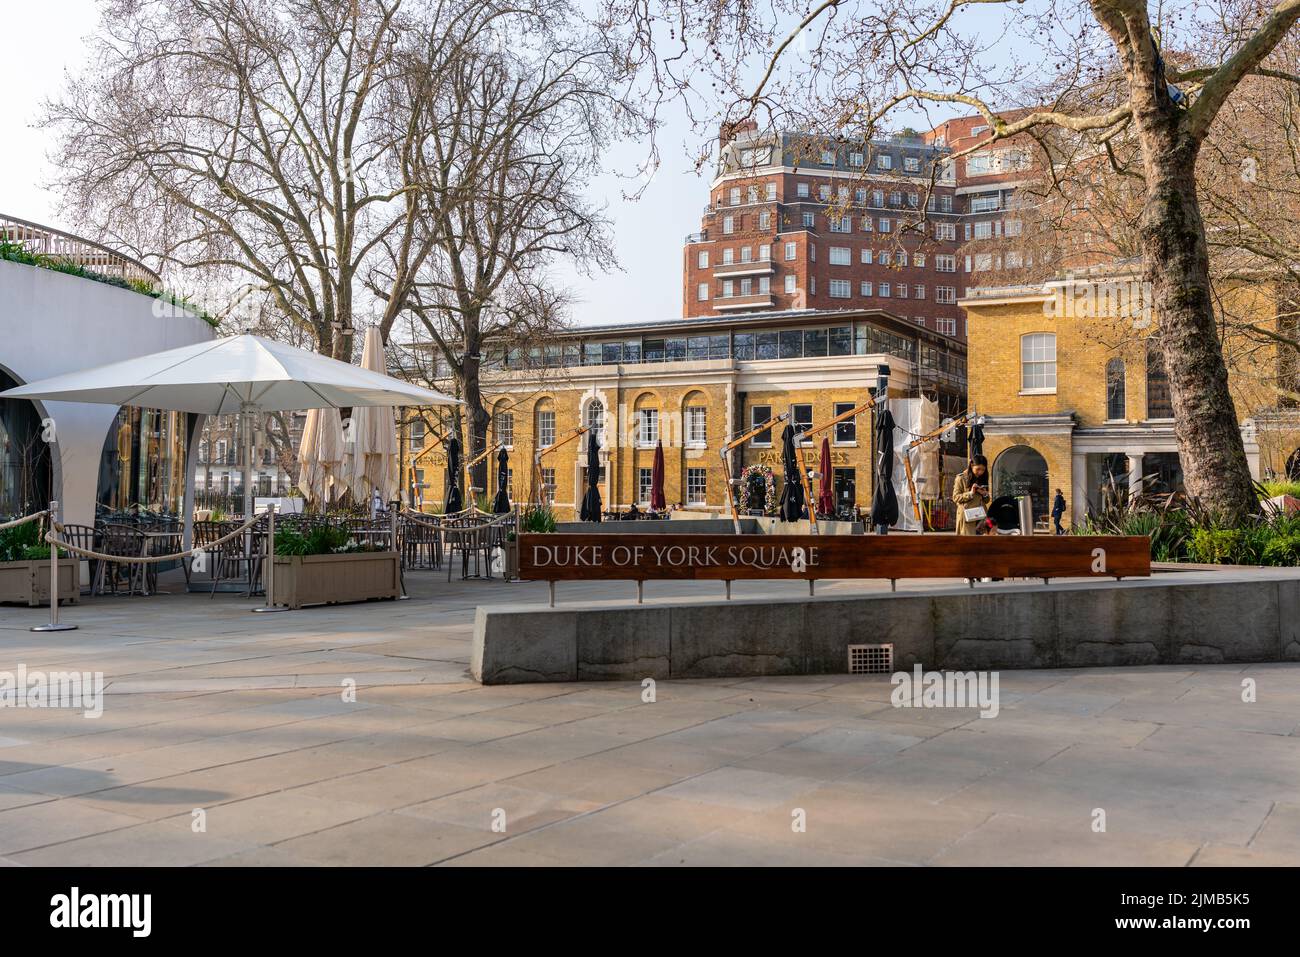 a Sign on benches reads 'Duke of York Square', located in the high fashion and art area of Chelsea, London Stock Photo